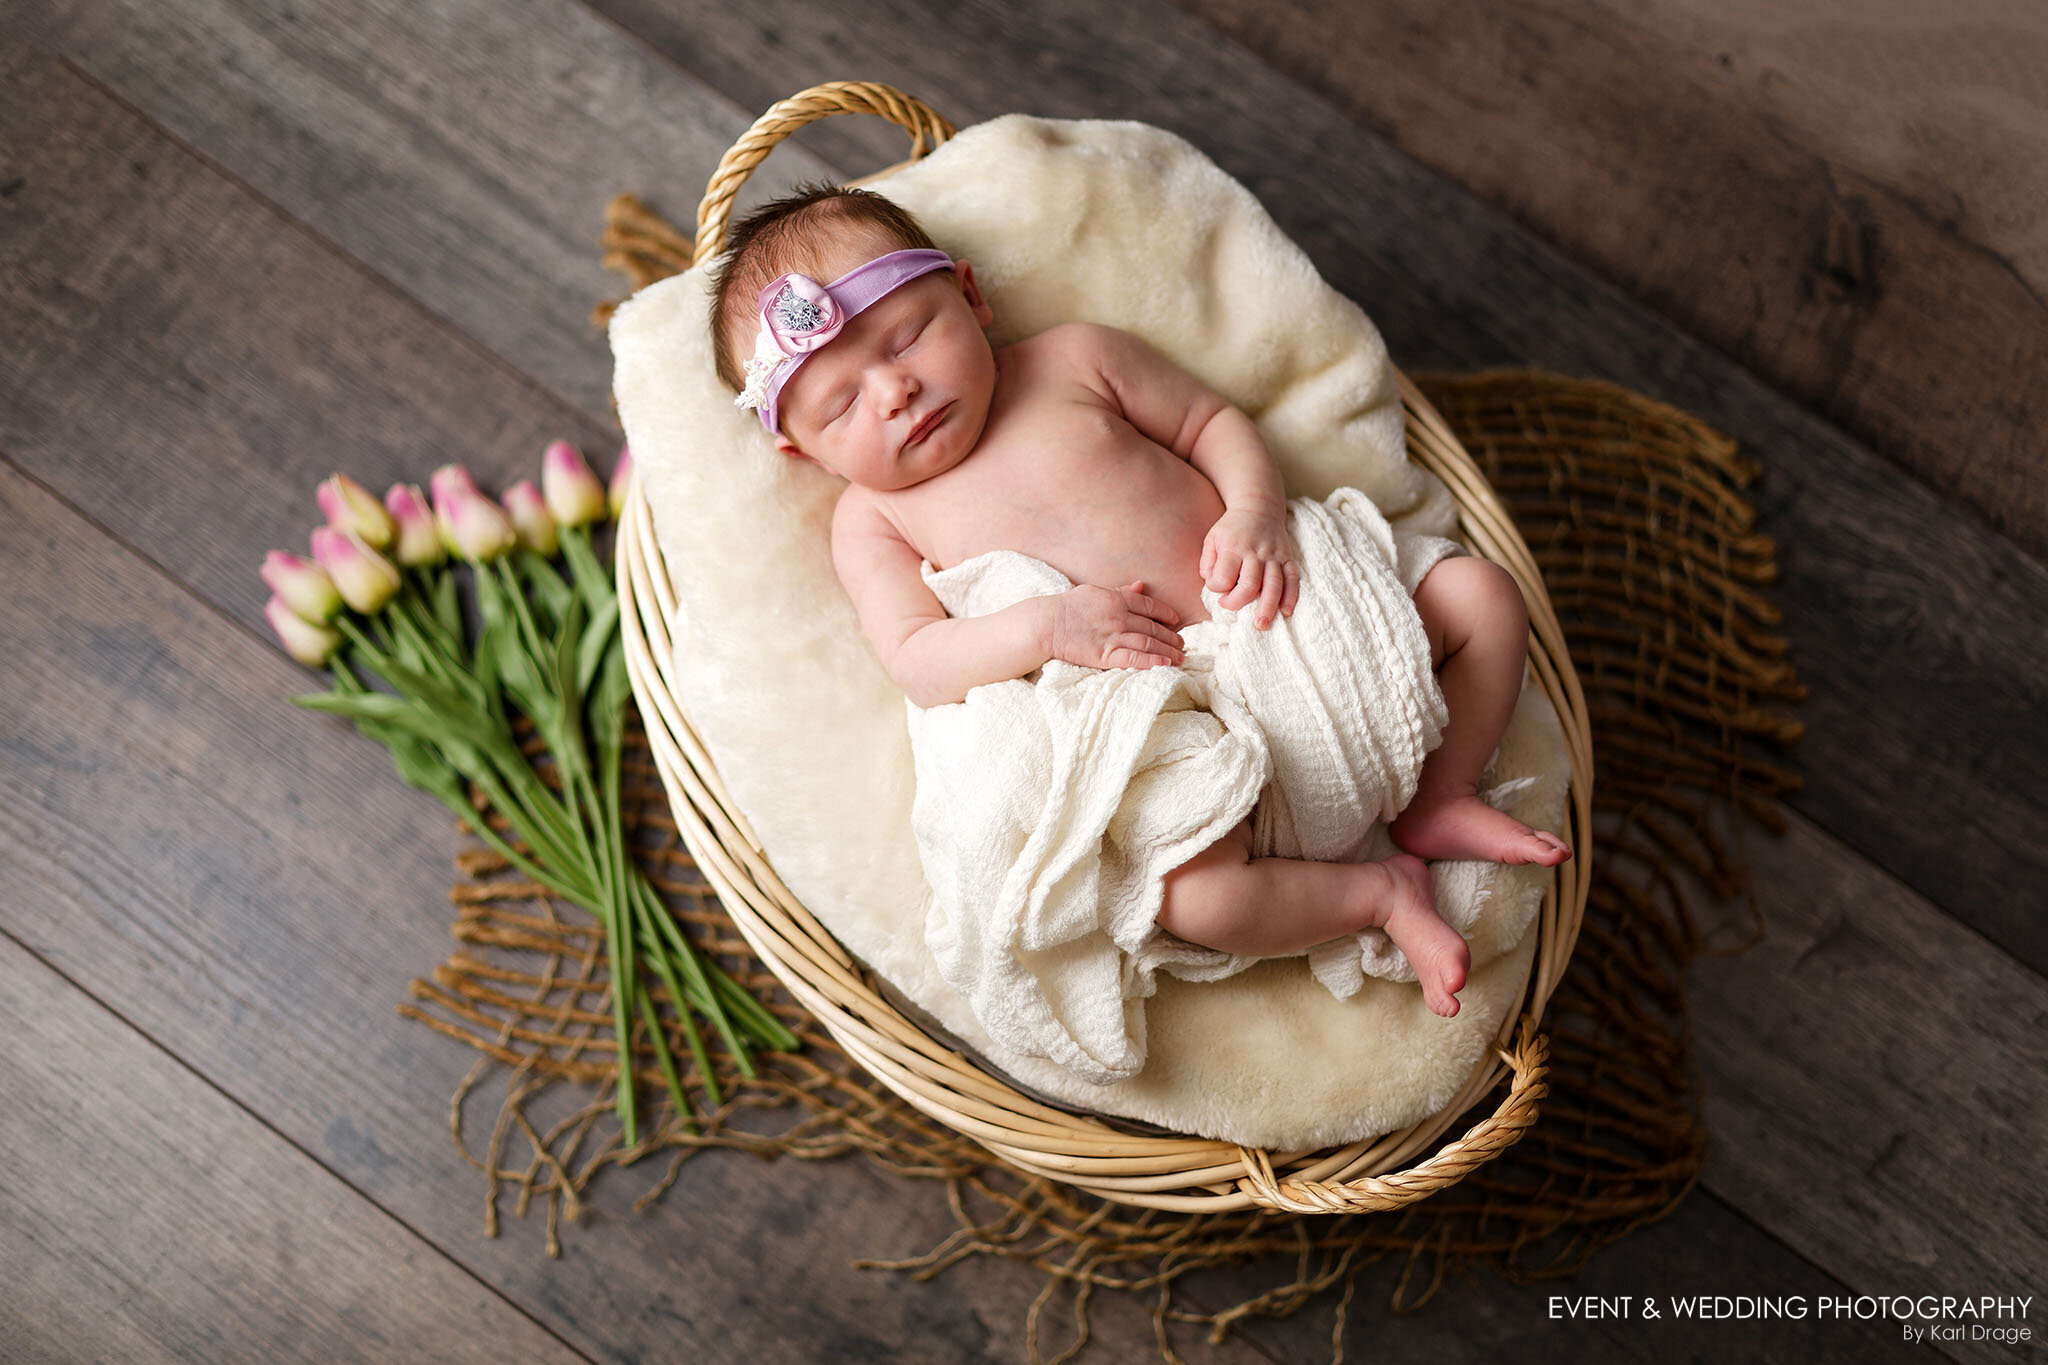 Baby girl asleep in a whicker basket during her newborn photo shoot near Corby.